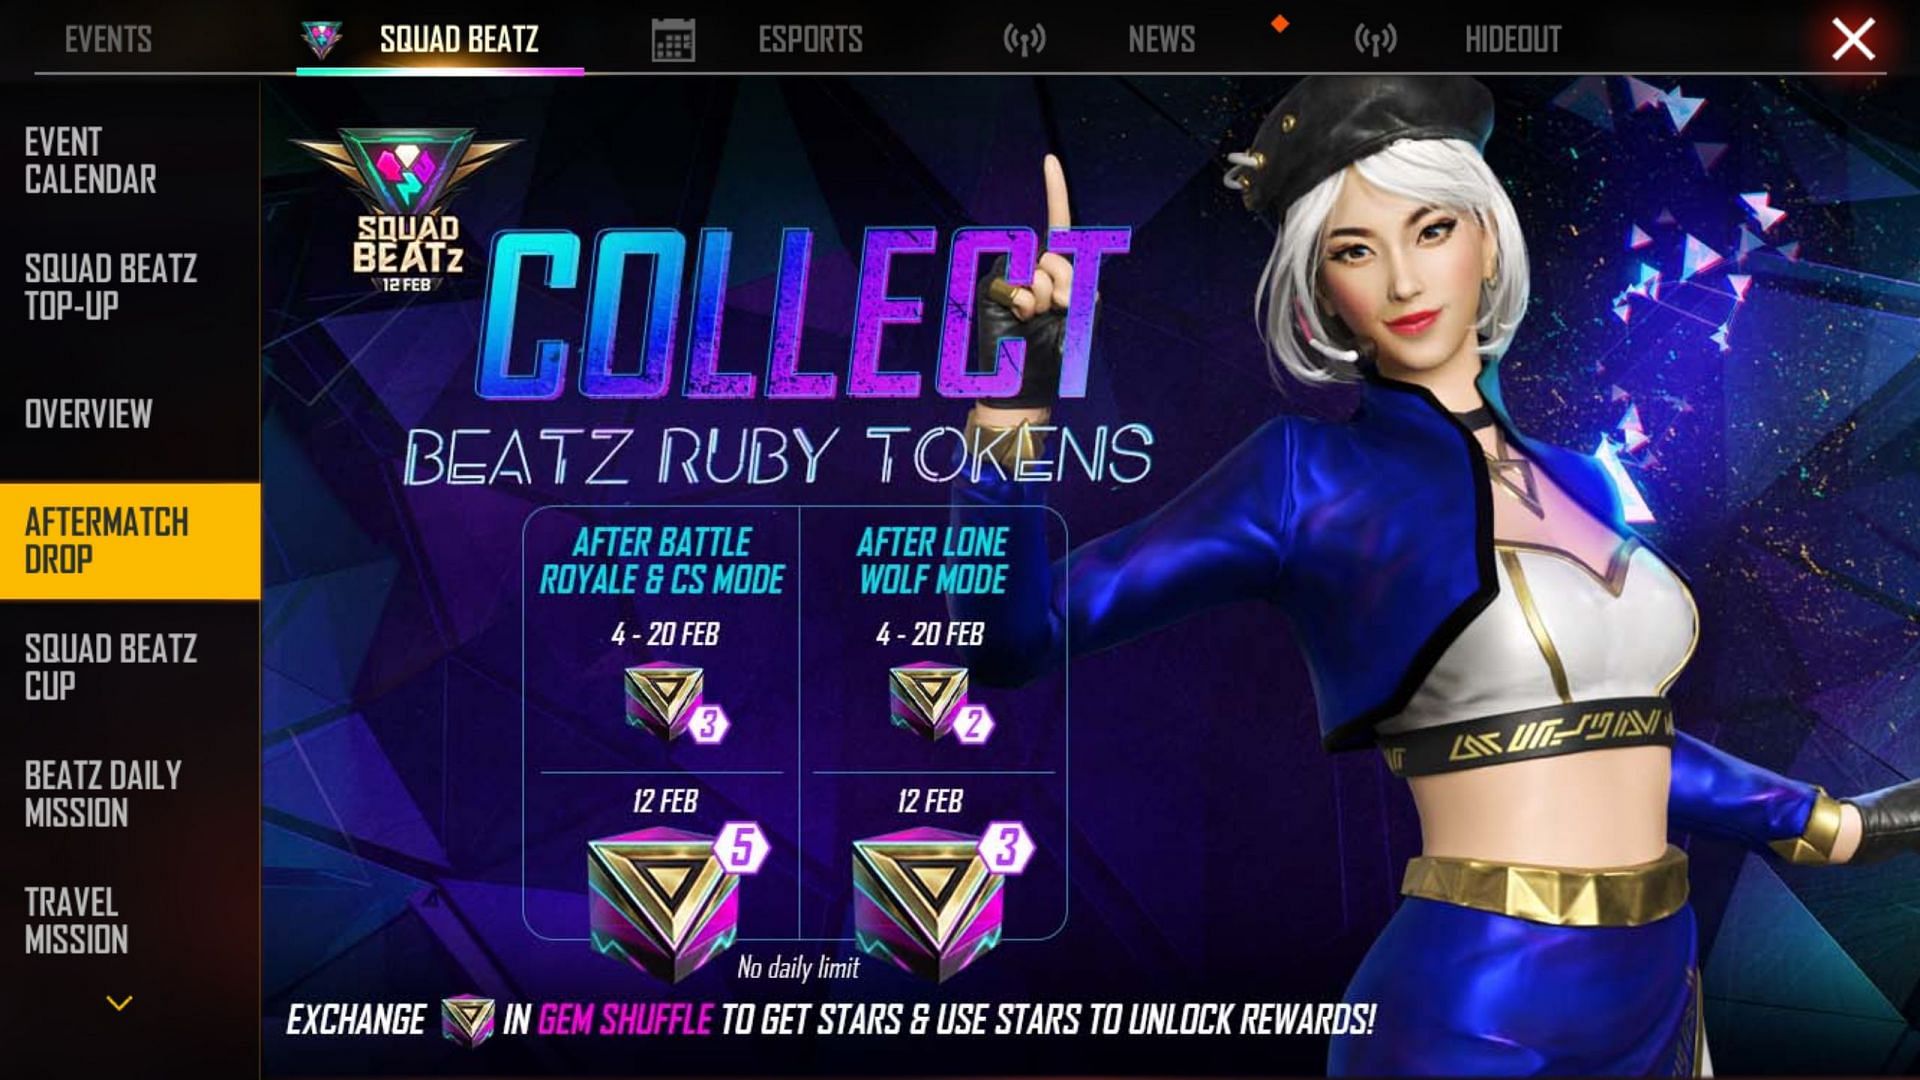 Playing matches rewards them with the tokens (Image via Garena)